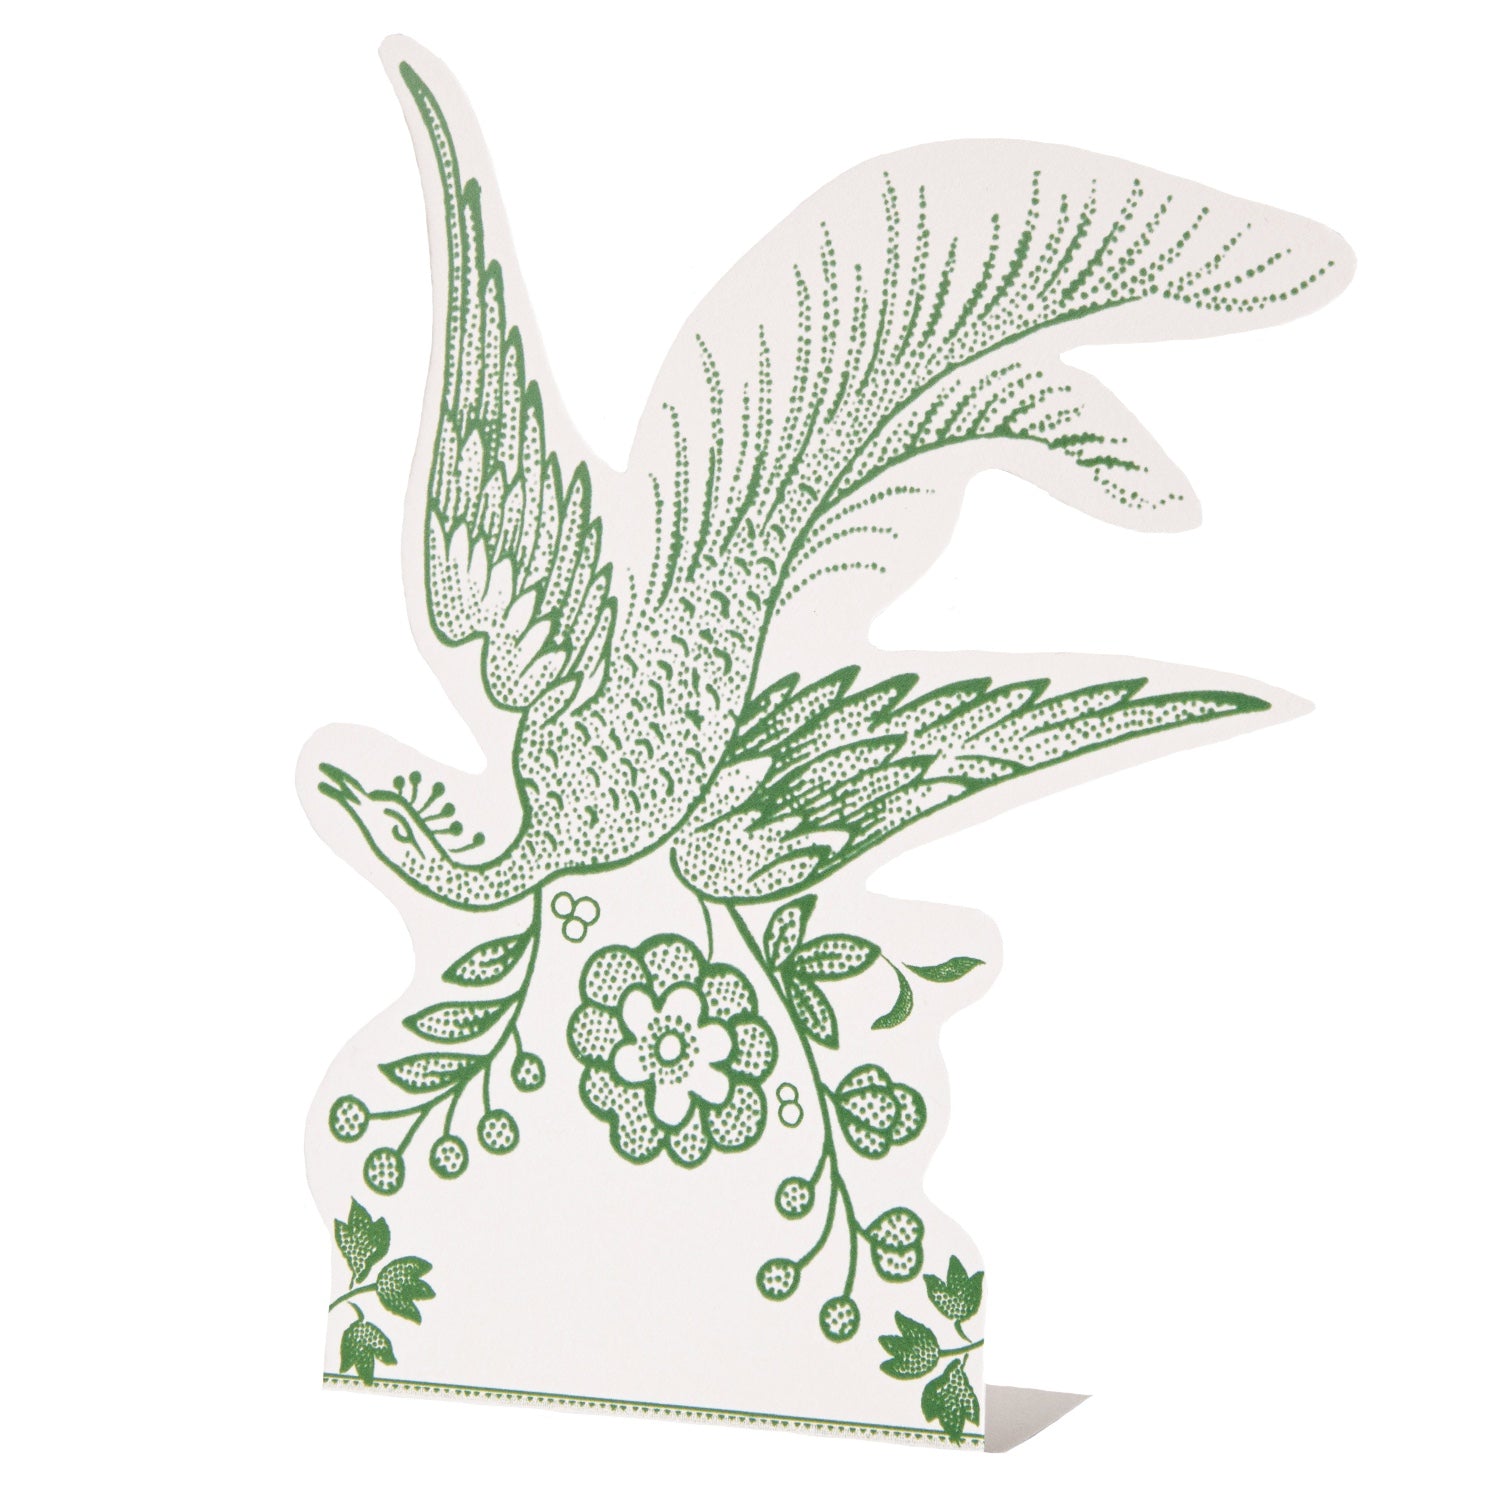 A Green Asiatic Pheasants Place Card by Hester &amp; Cook, on a white background, creates a place card that makes guests feel welcomed and adds a touch of Burleigh collaboration.